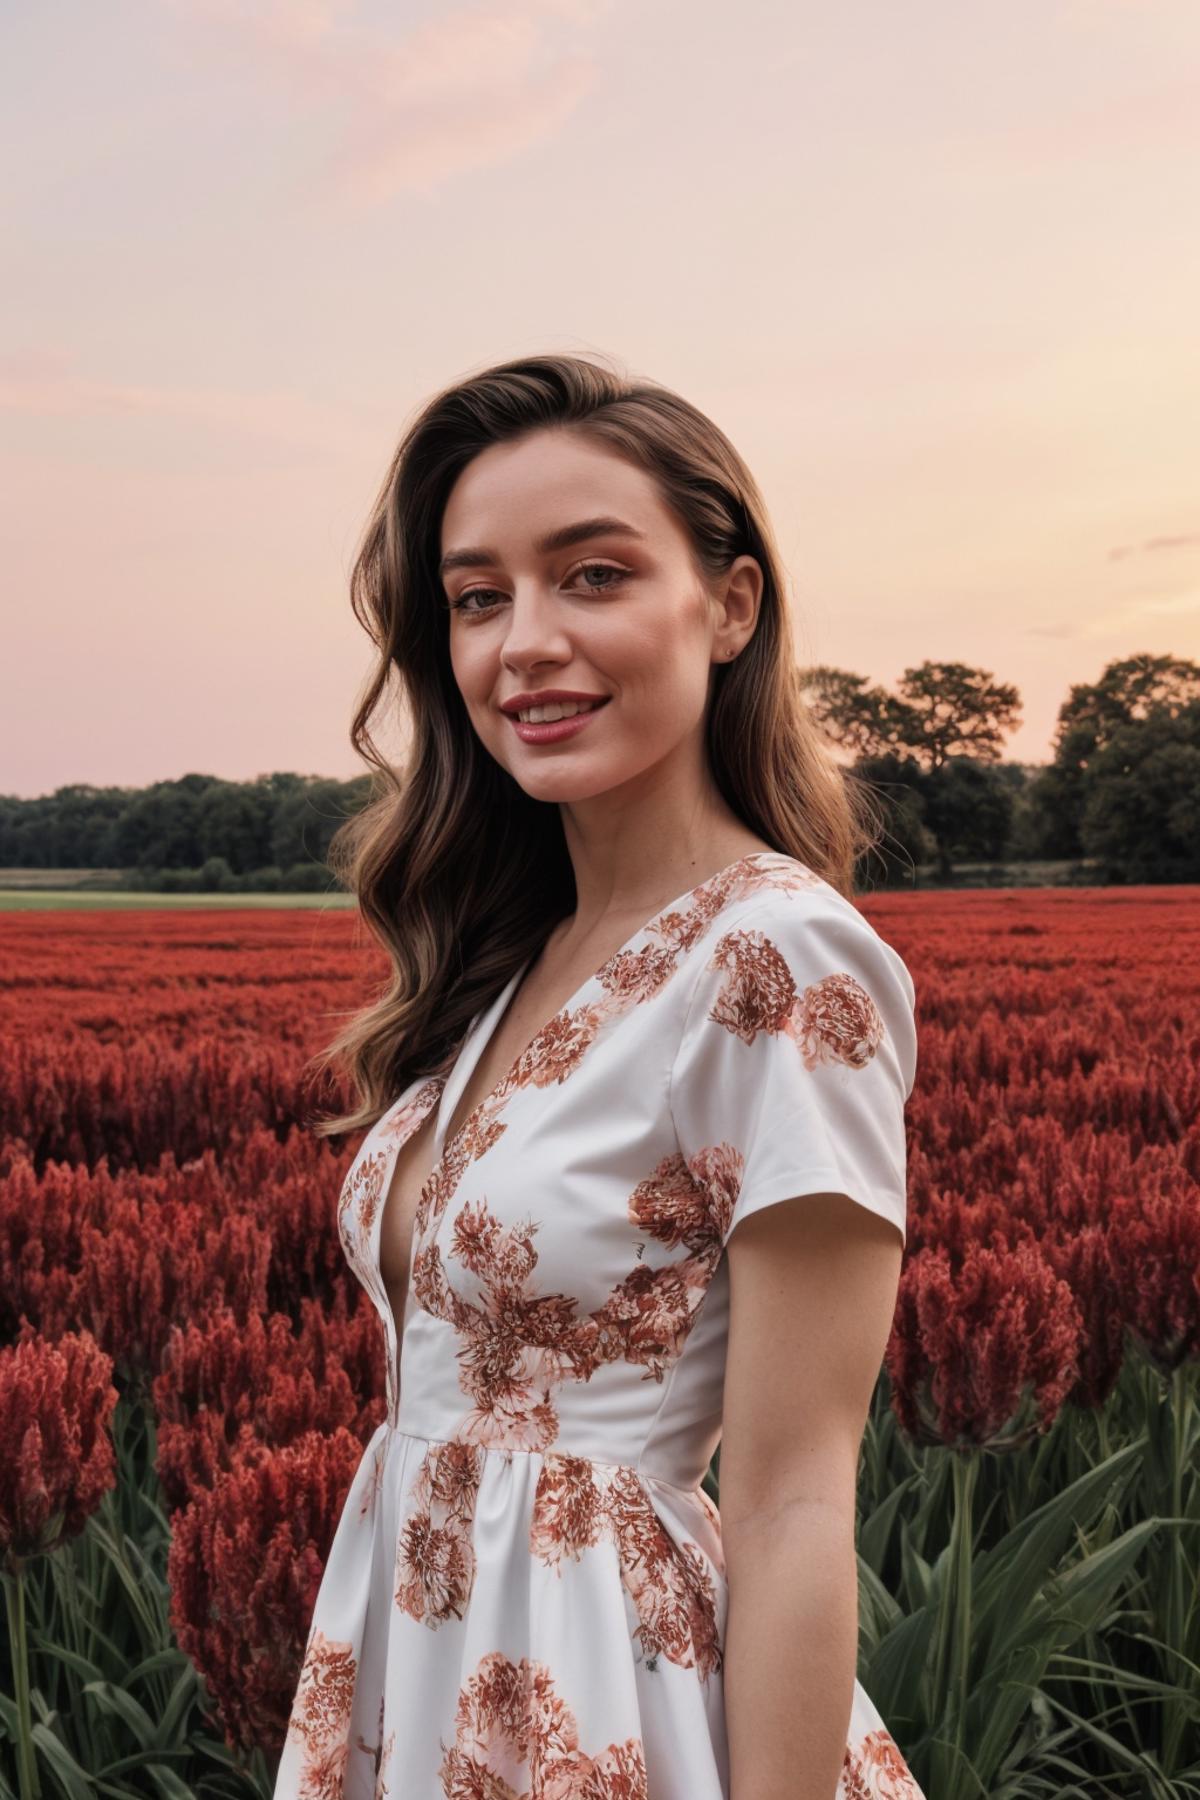 A woman in a dress standing in a field of red flowers.